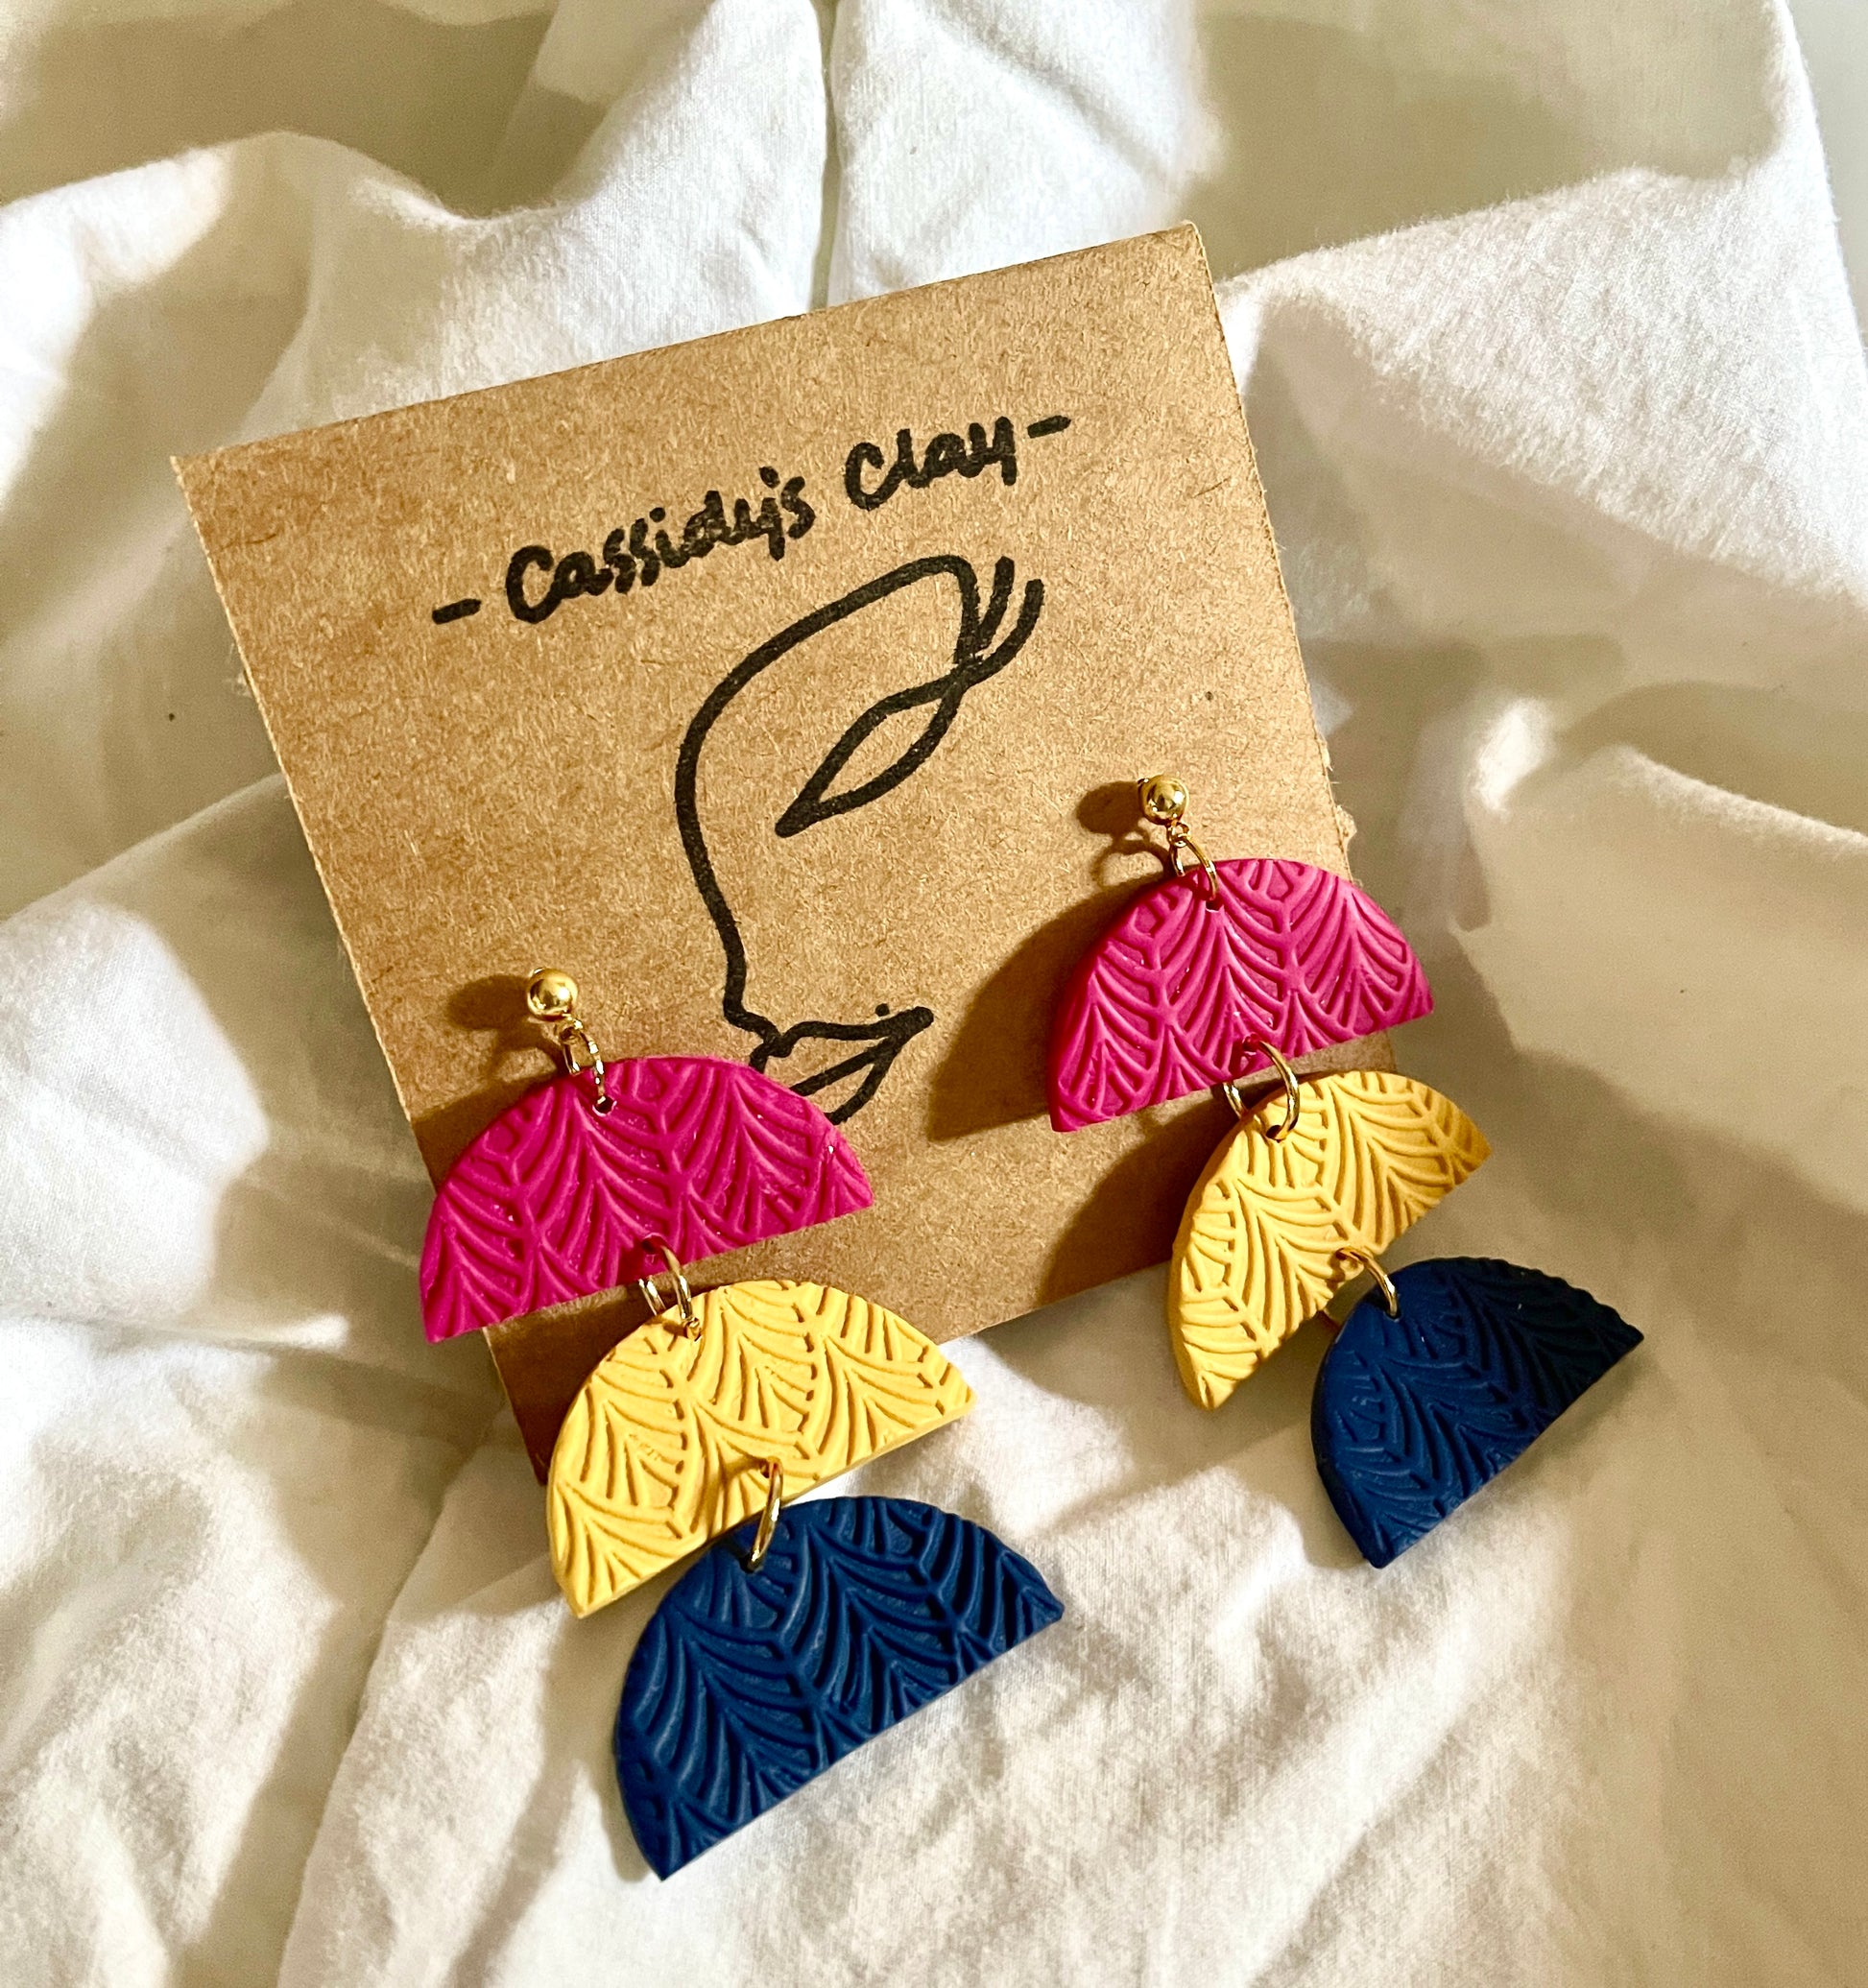 3 half moon shapes held together vertically by small gold rings.  First tier is pink, second tier is yellow, and third tier is navy.  They are on a cardboard earring holder. 2.5" long 1.5" wide